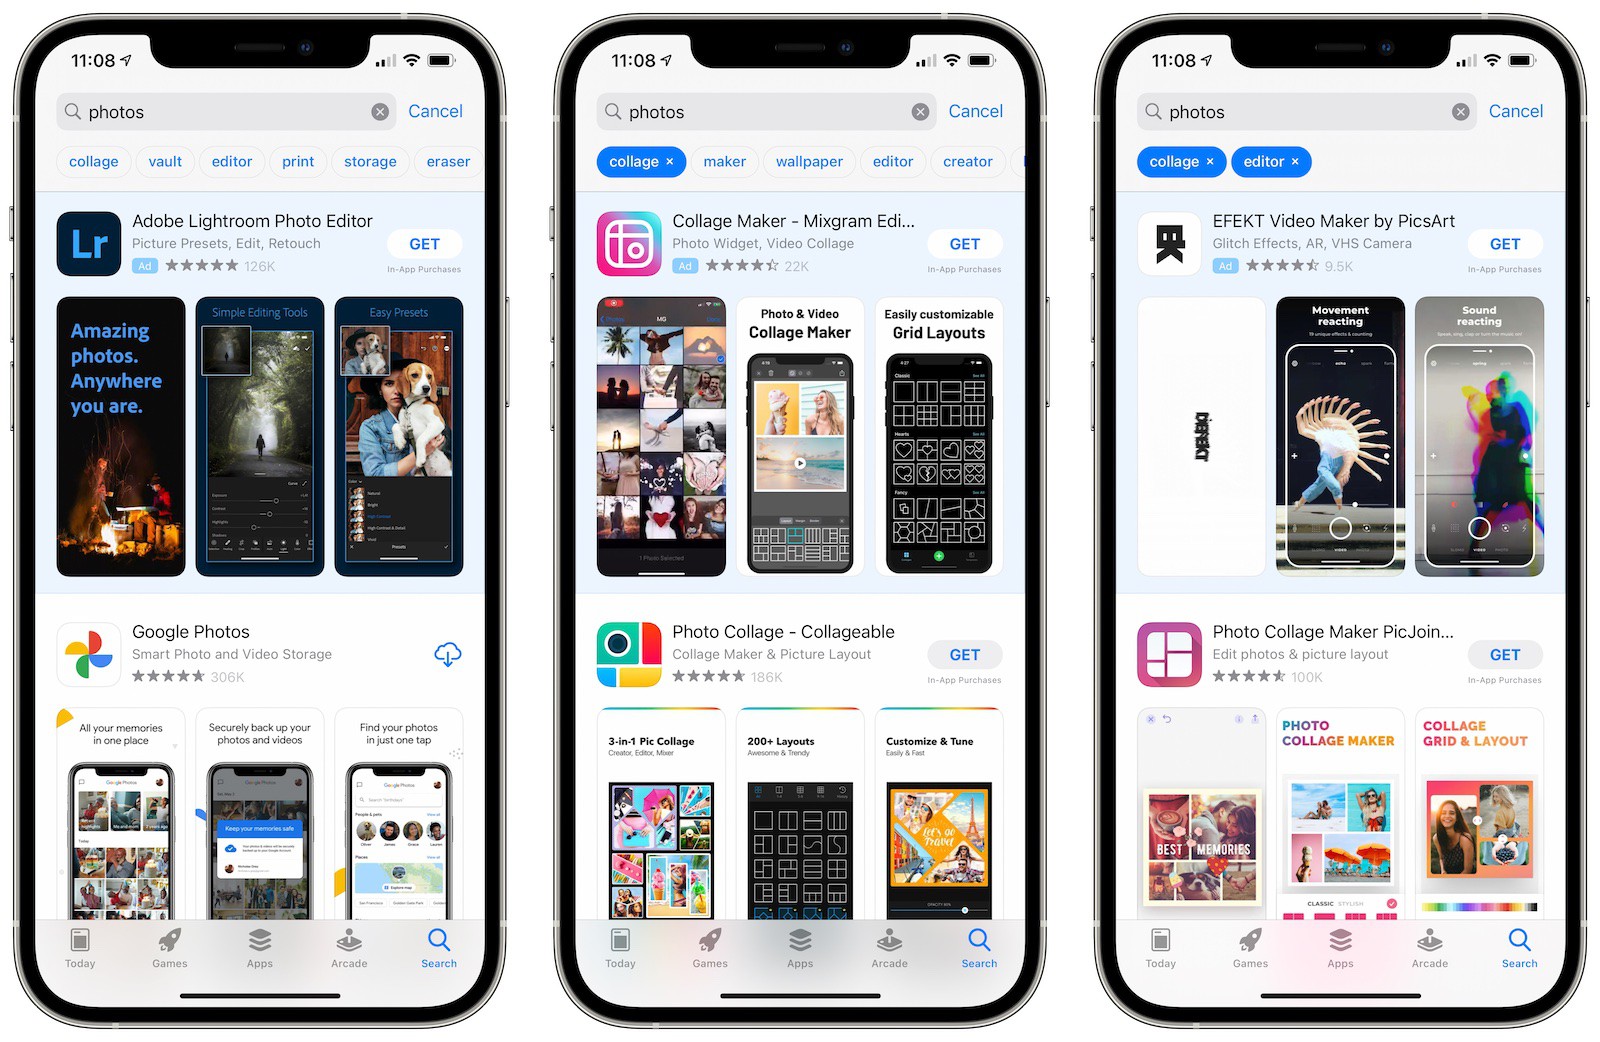 According to Apple's plans, there will be ads in several places in the App Store